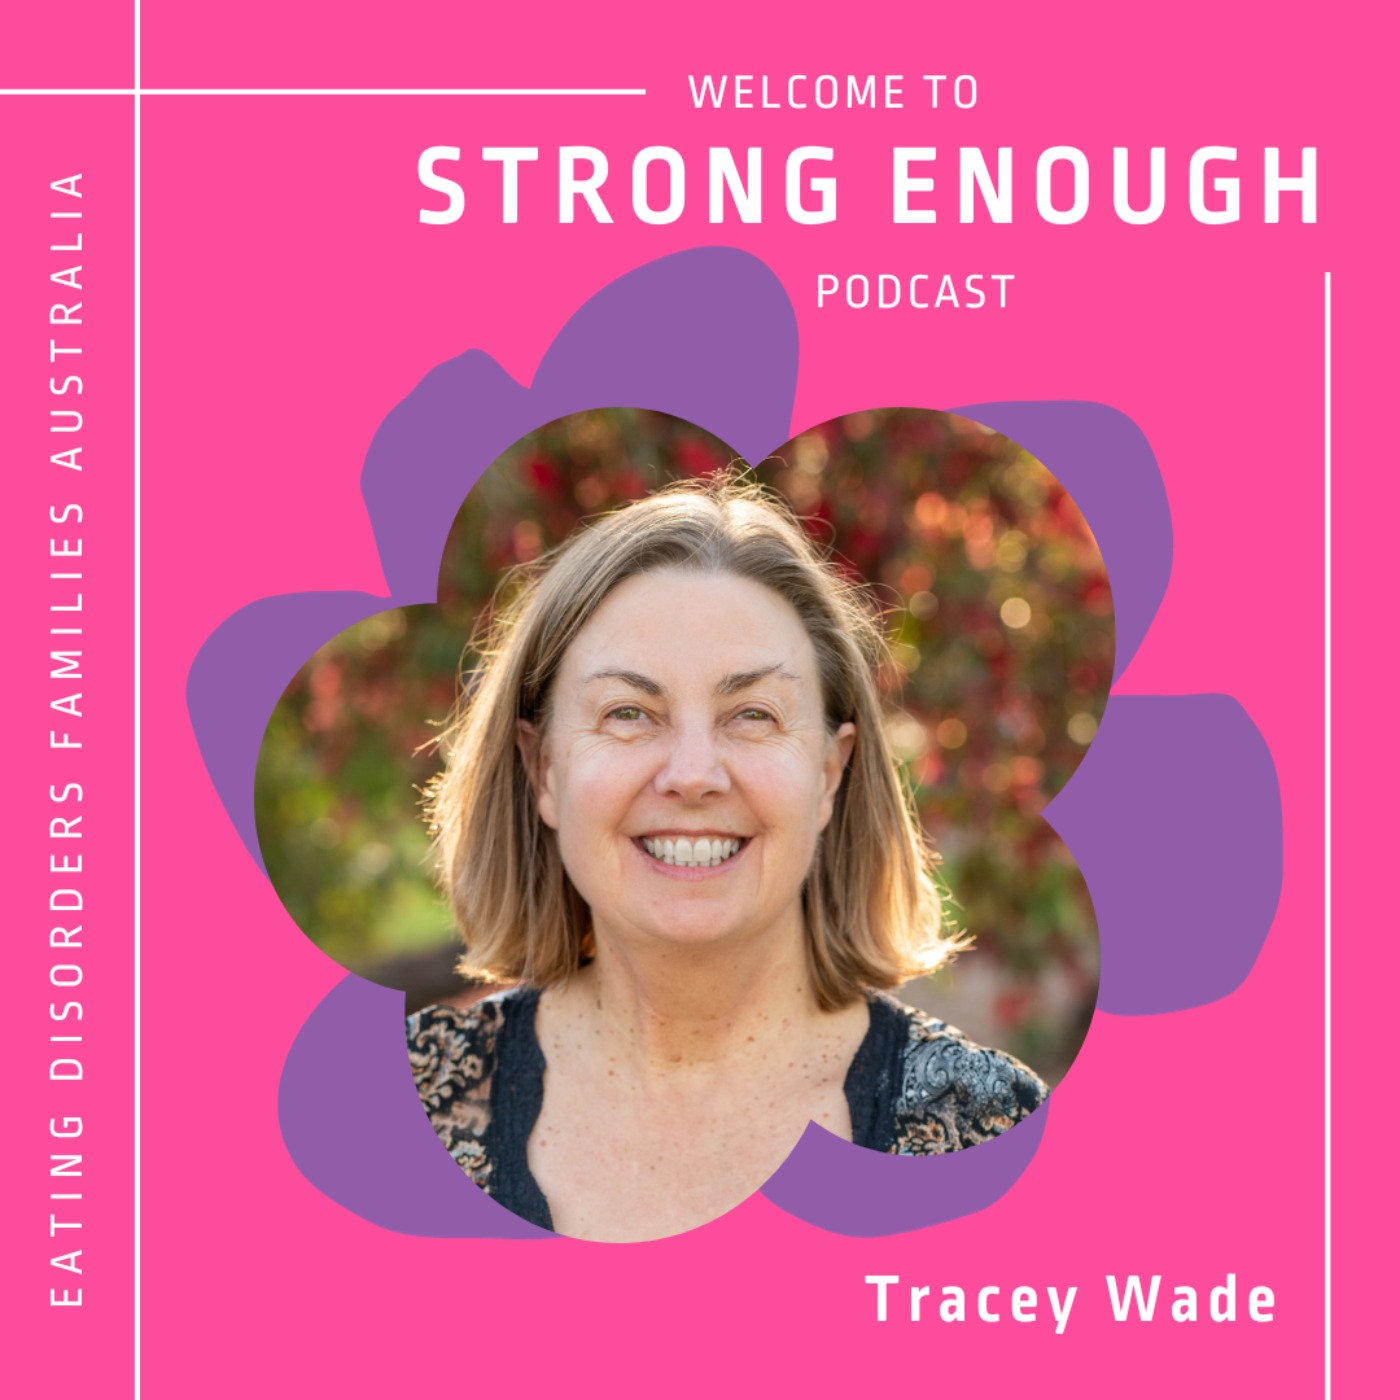 The latest eating disorder research on genetics, social media and perfectionism with Professor Tracey Wade